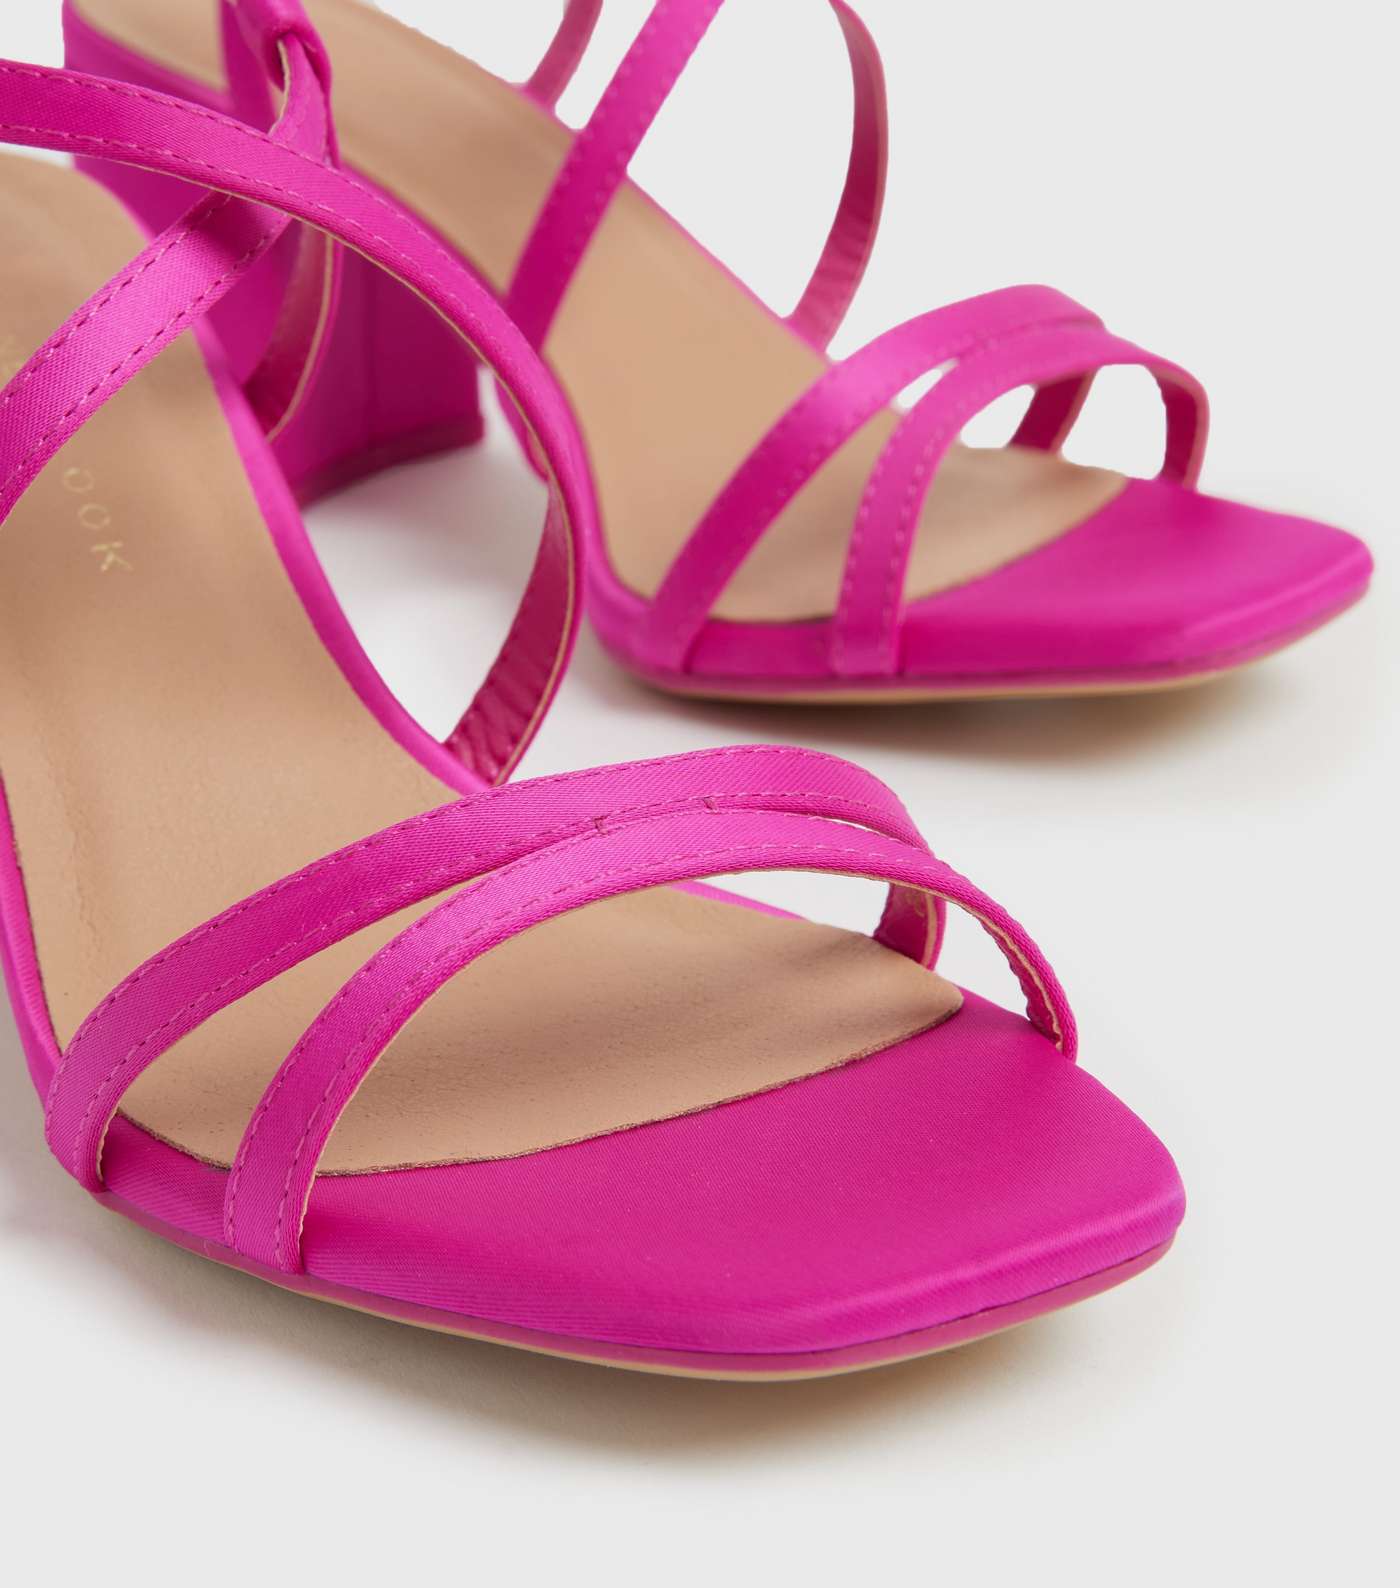 Wide Fit Bright Pink Satin Strappy Block Heel Sandals Image 4